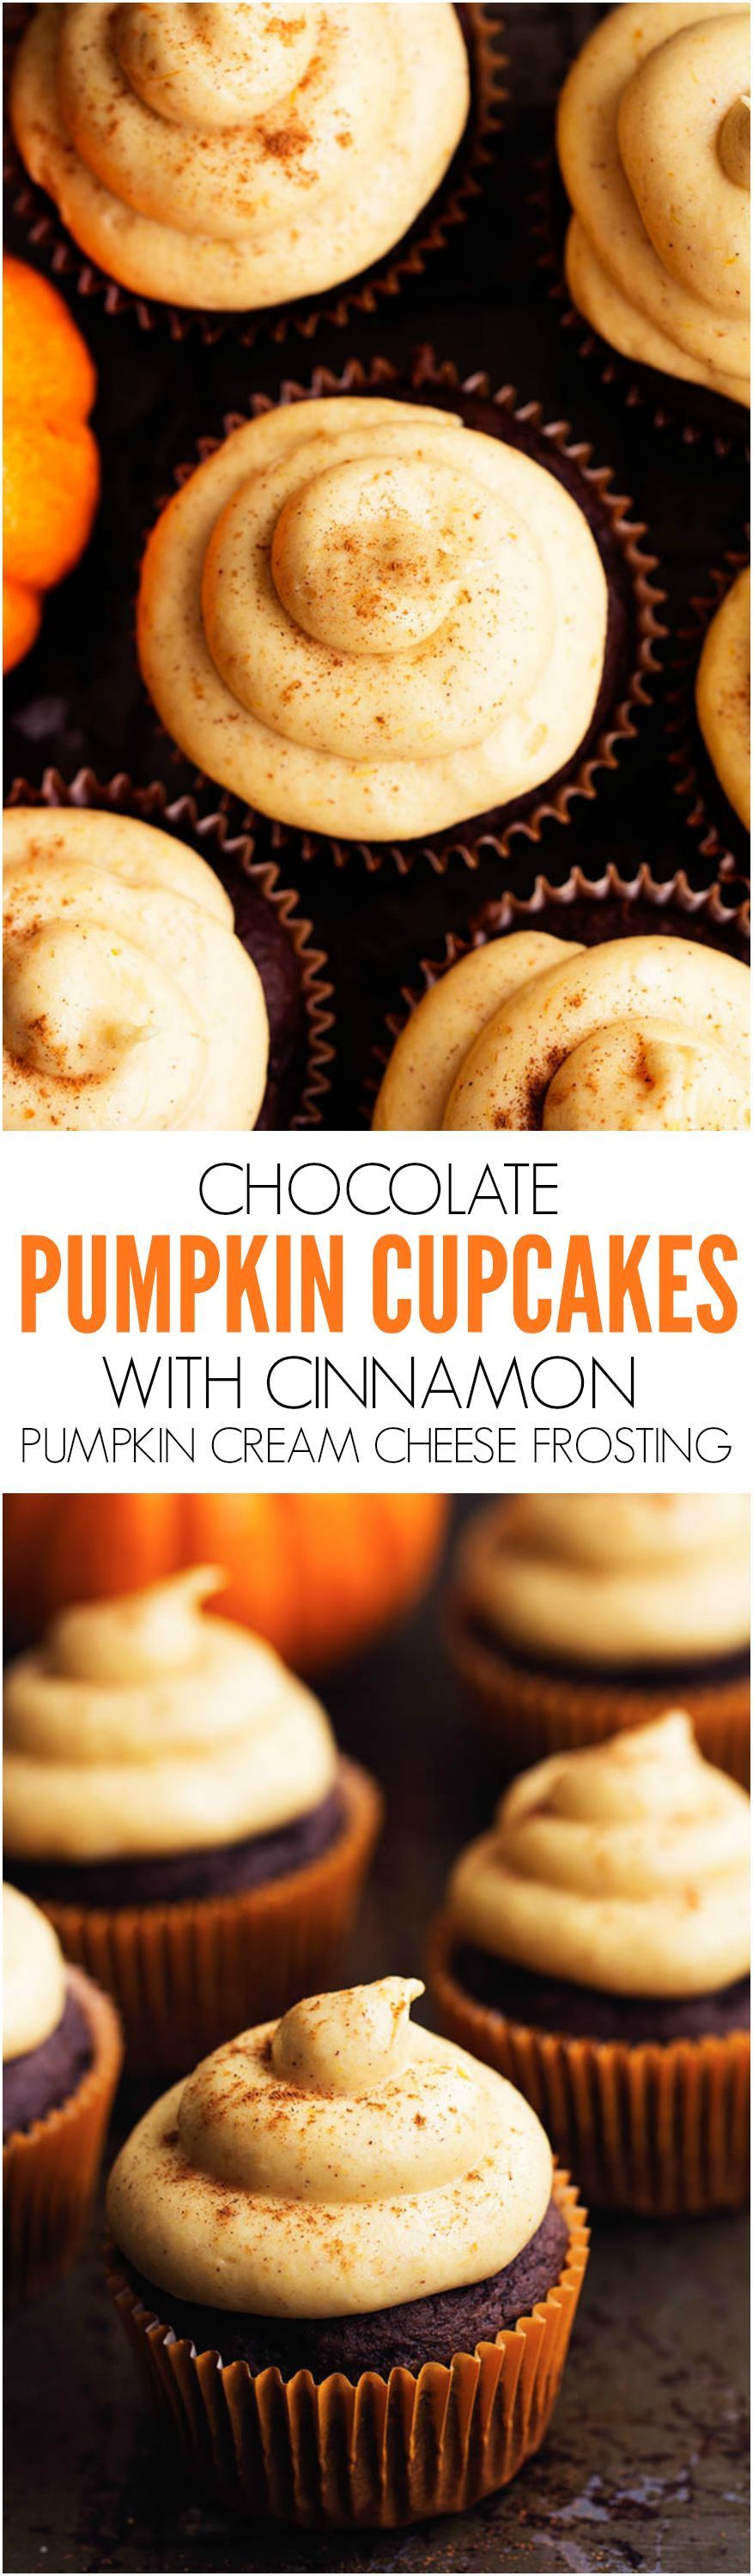 Moist chocolate pumpkin cupcakes with an amazing cinnamon pumpkin cream cheese frosting! These are the perfect fall treat!